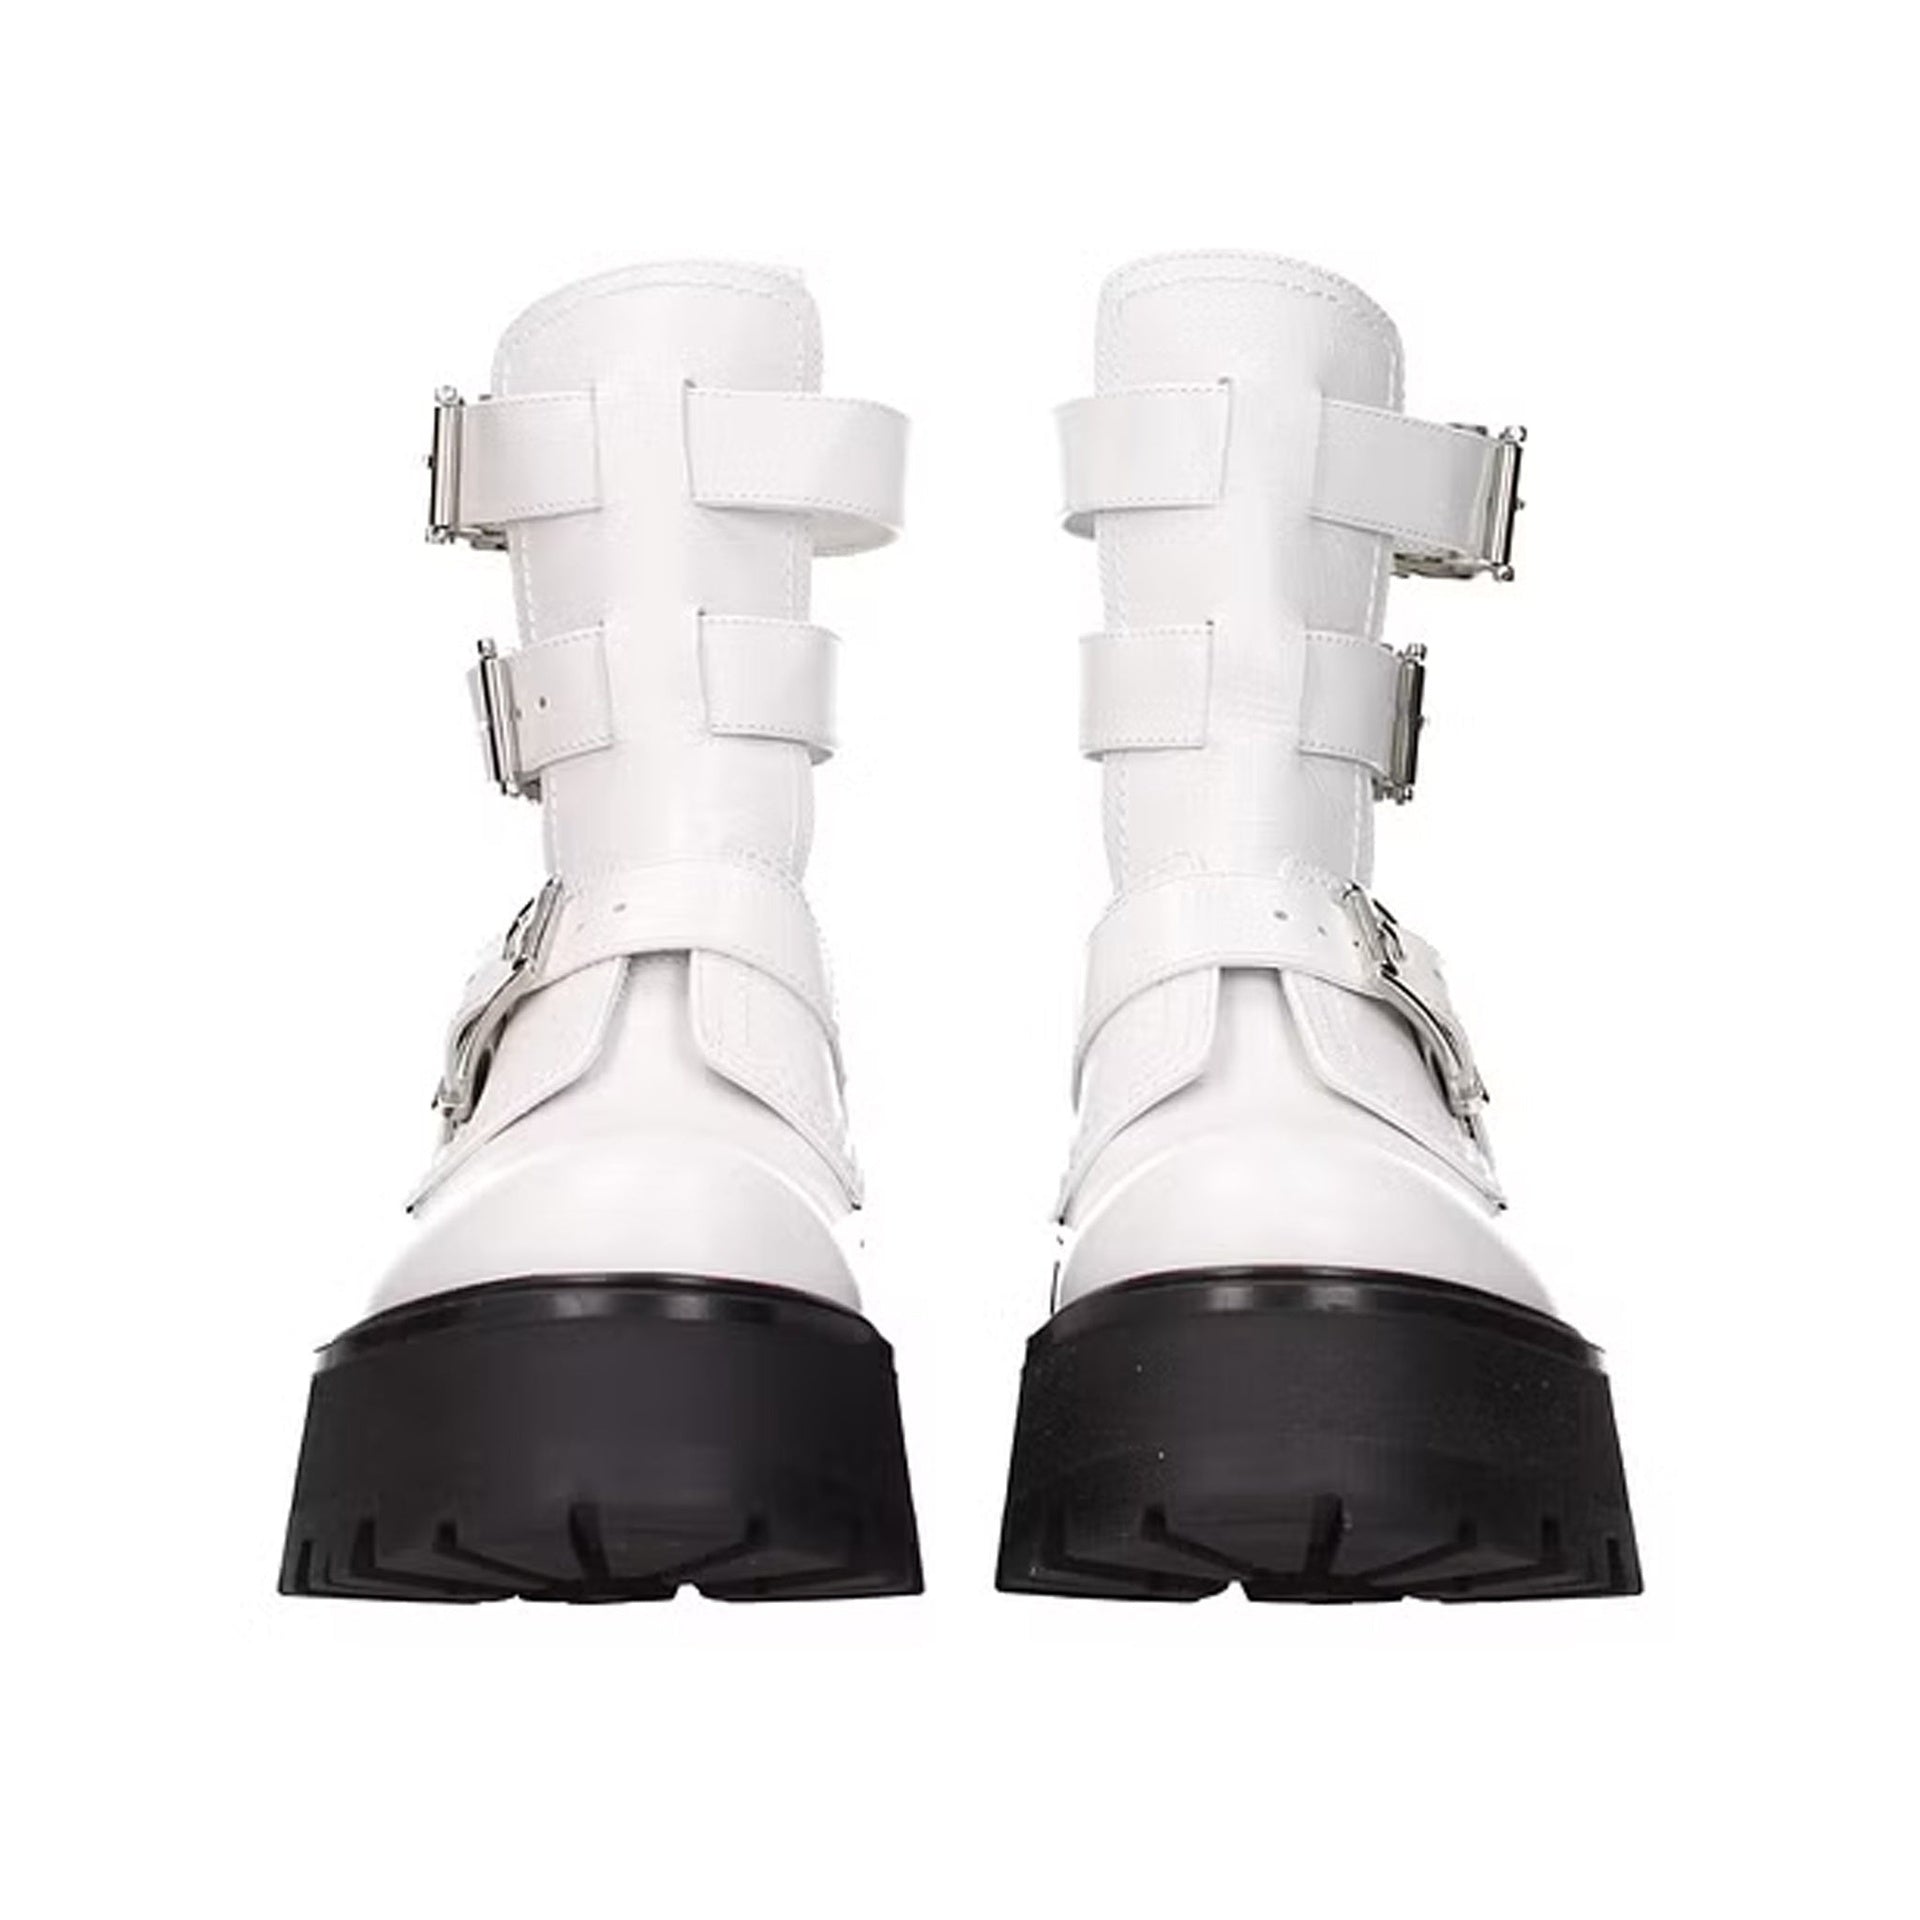 ALEXANDER-MCQUEEN-OUTLET-SALE-Alexander-Mcqueen-Leather-Ankle-Boots-Stiefel-Stiefeletten-WHITE-37_5-ARCHIVE-COLLECTION-4.jpg